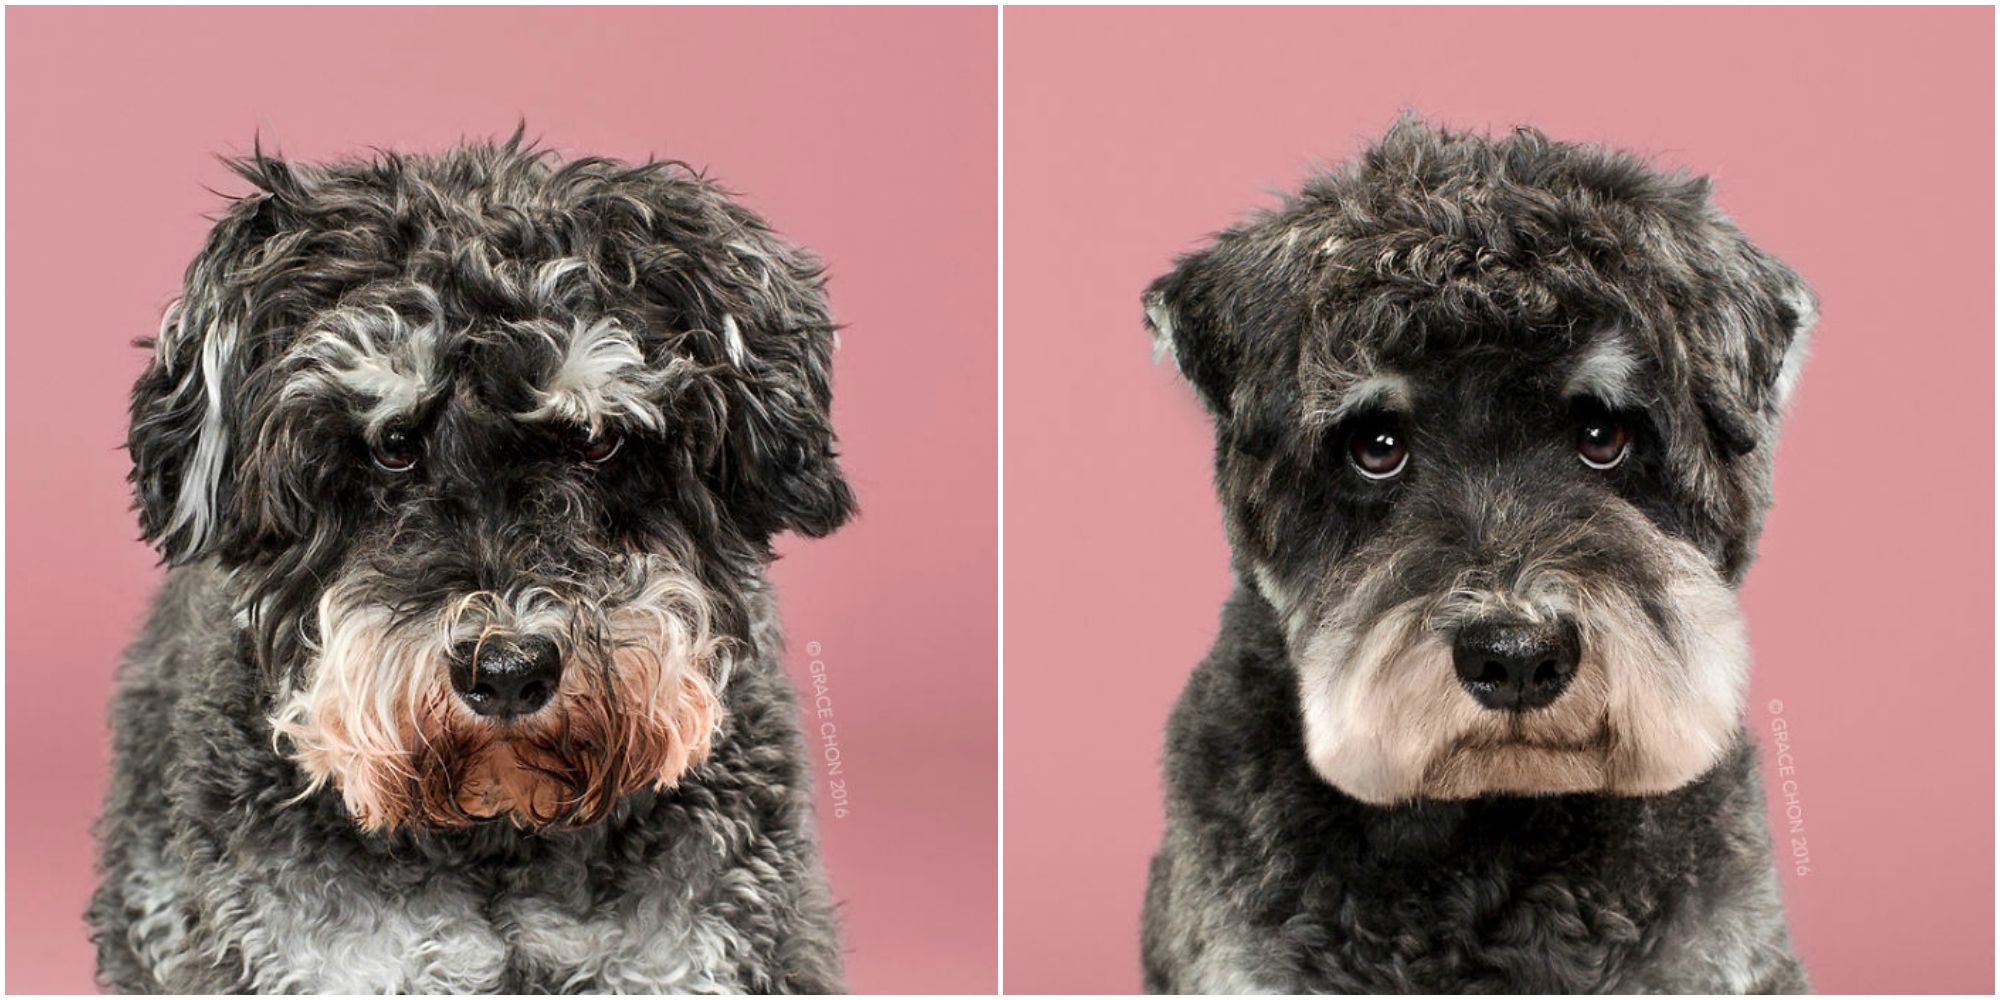 Hairy Dogs Get Makeovers In Photo Series Grace Chon